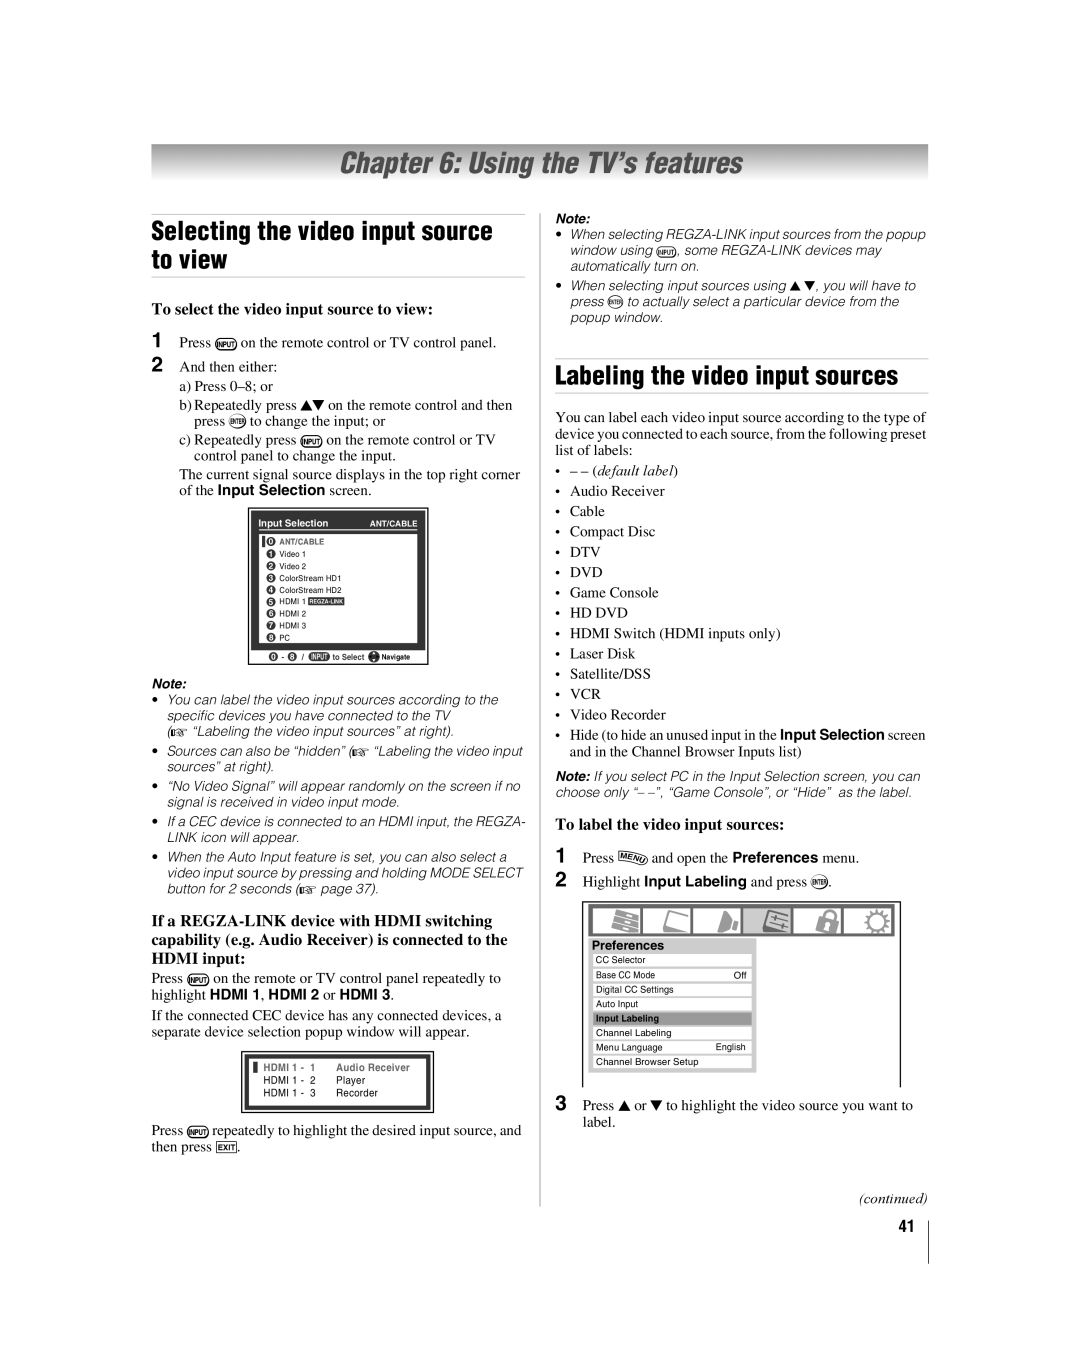 Toshiba 2XF550U Using the TV’s features, Labeling the video input sources, To label the video input sources, default label 